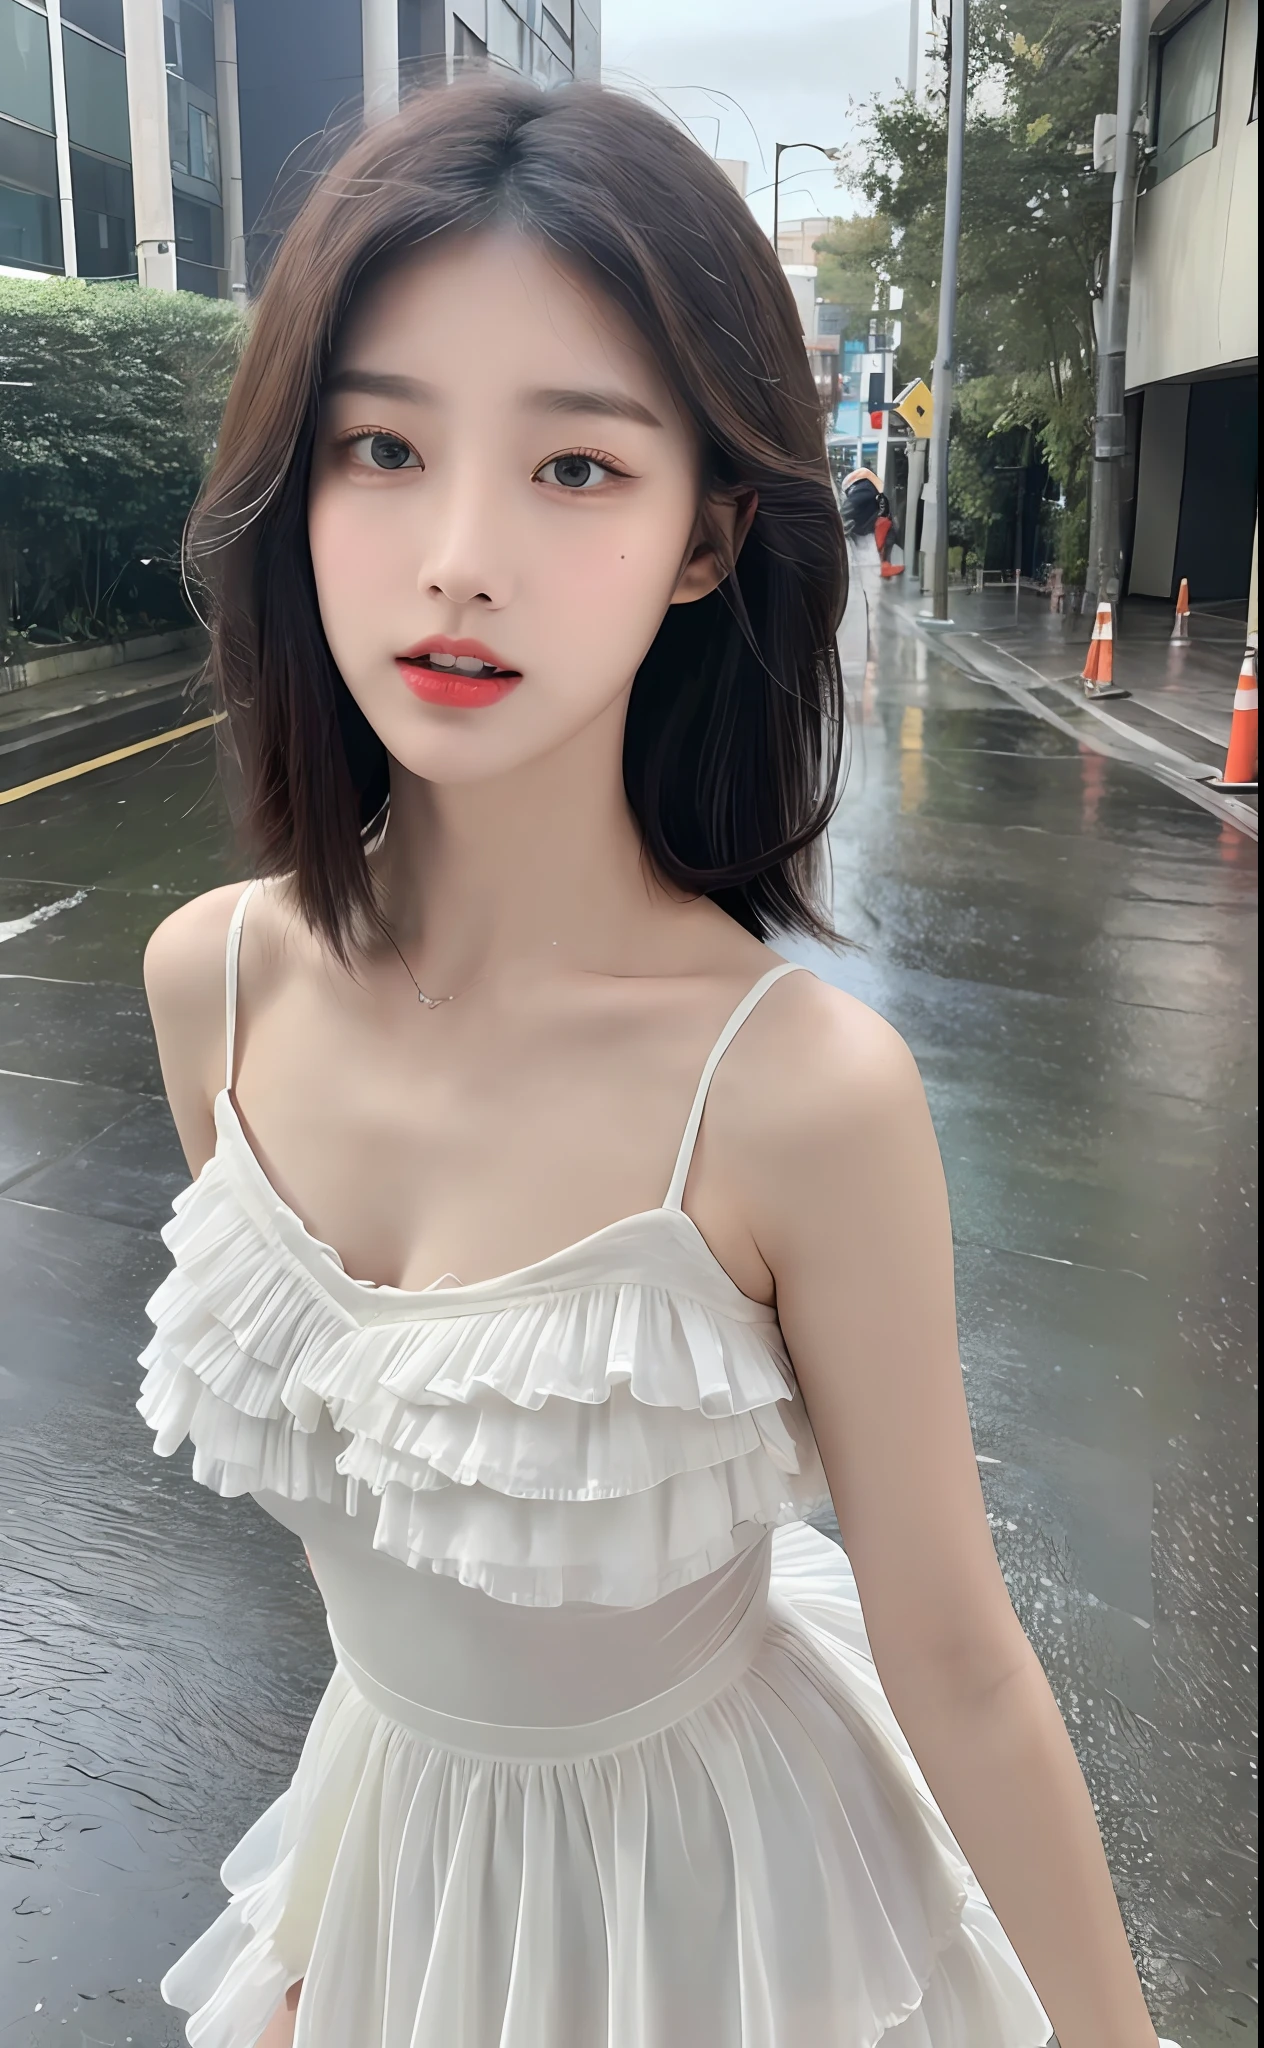 ((Best Quality, 8k, Masterpiece: 1.3)), Focus: 1.2, Perfect Body Beauty: 1.4, Buttocks: 1.2, ((Layered Haircut)), (Wet Clothes: 1.1) , (Rain, Street:1.3), Tulle Fabric, Slip Dress, (White Dress: 1.2), Slouchy Style, Highly Detailed Face and Skin Texture, Delicate Eyes, Double Eyelids, Whitened Skin, Long Hair, (Shut Up: 1.5), Bare Shoulders